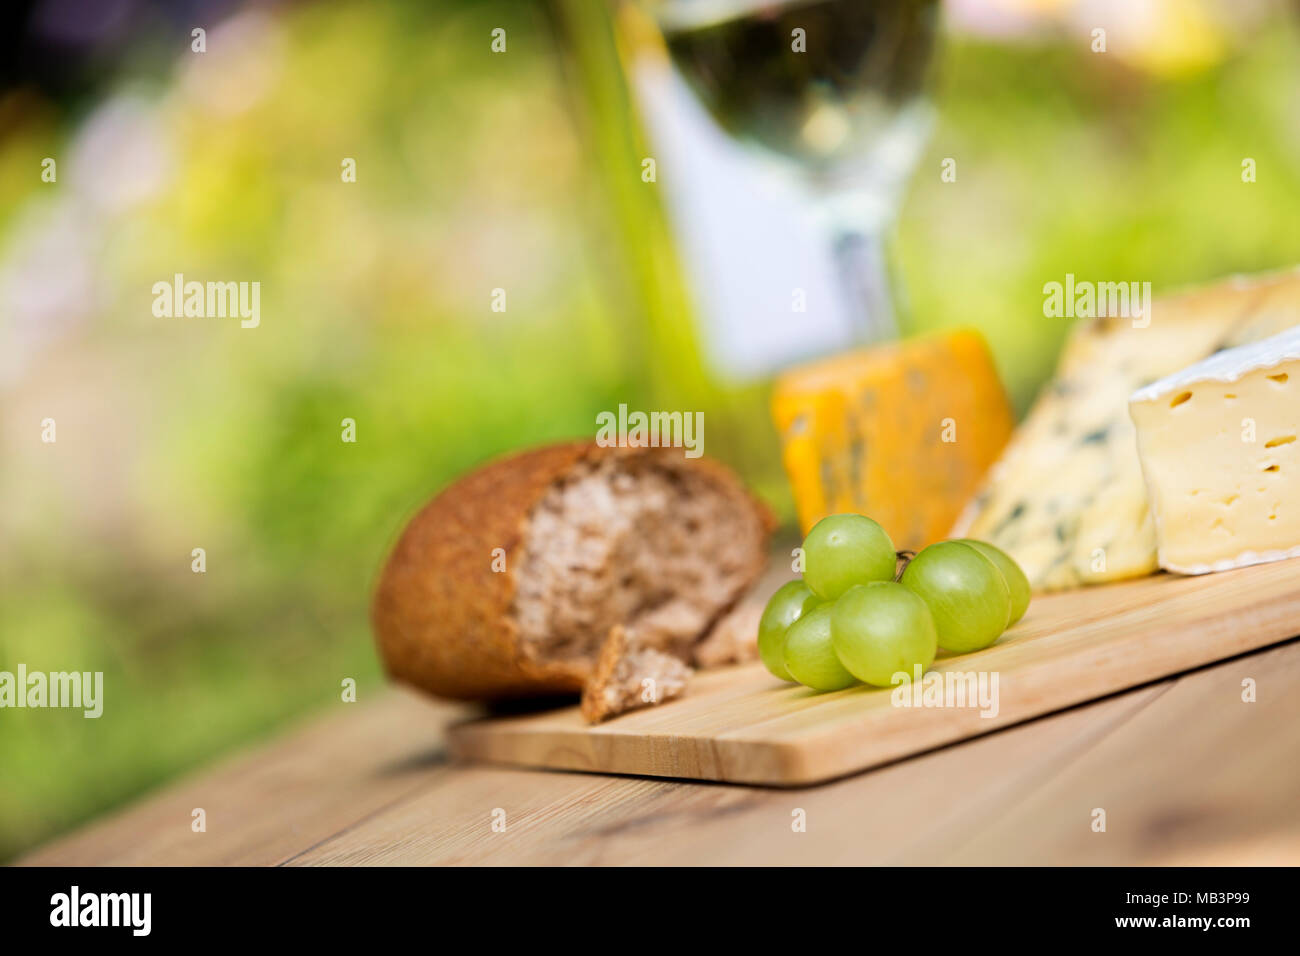 Selection of green grapes, cheese platter and white wine on wooden serving board on a sunny day Stock Photo